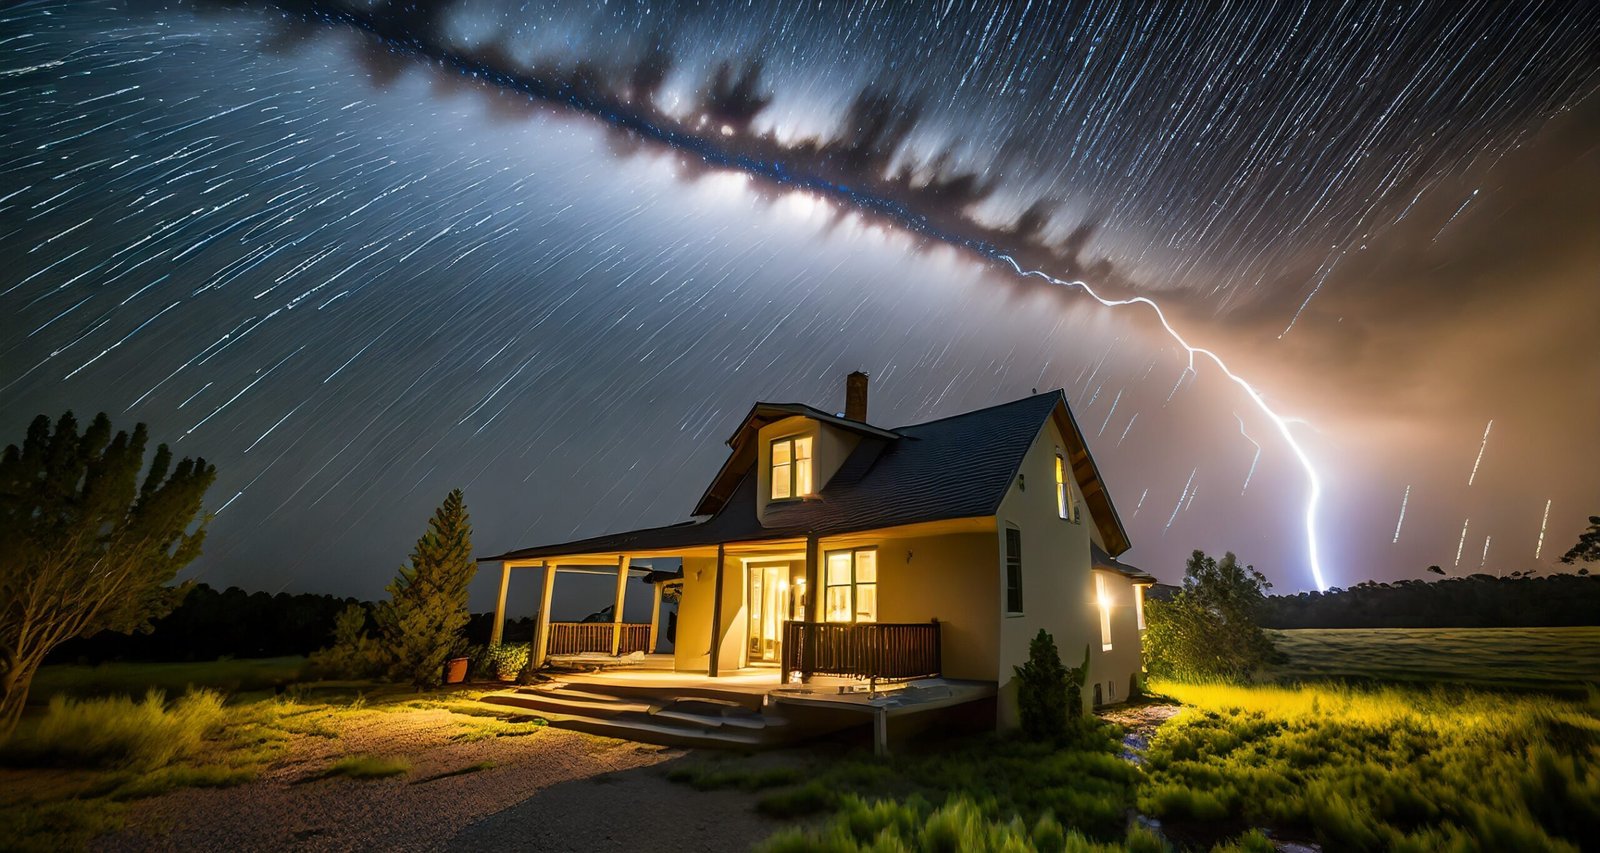 Storm over a house